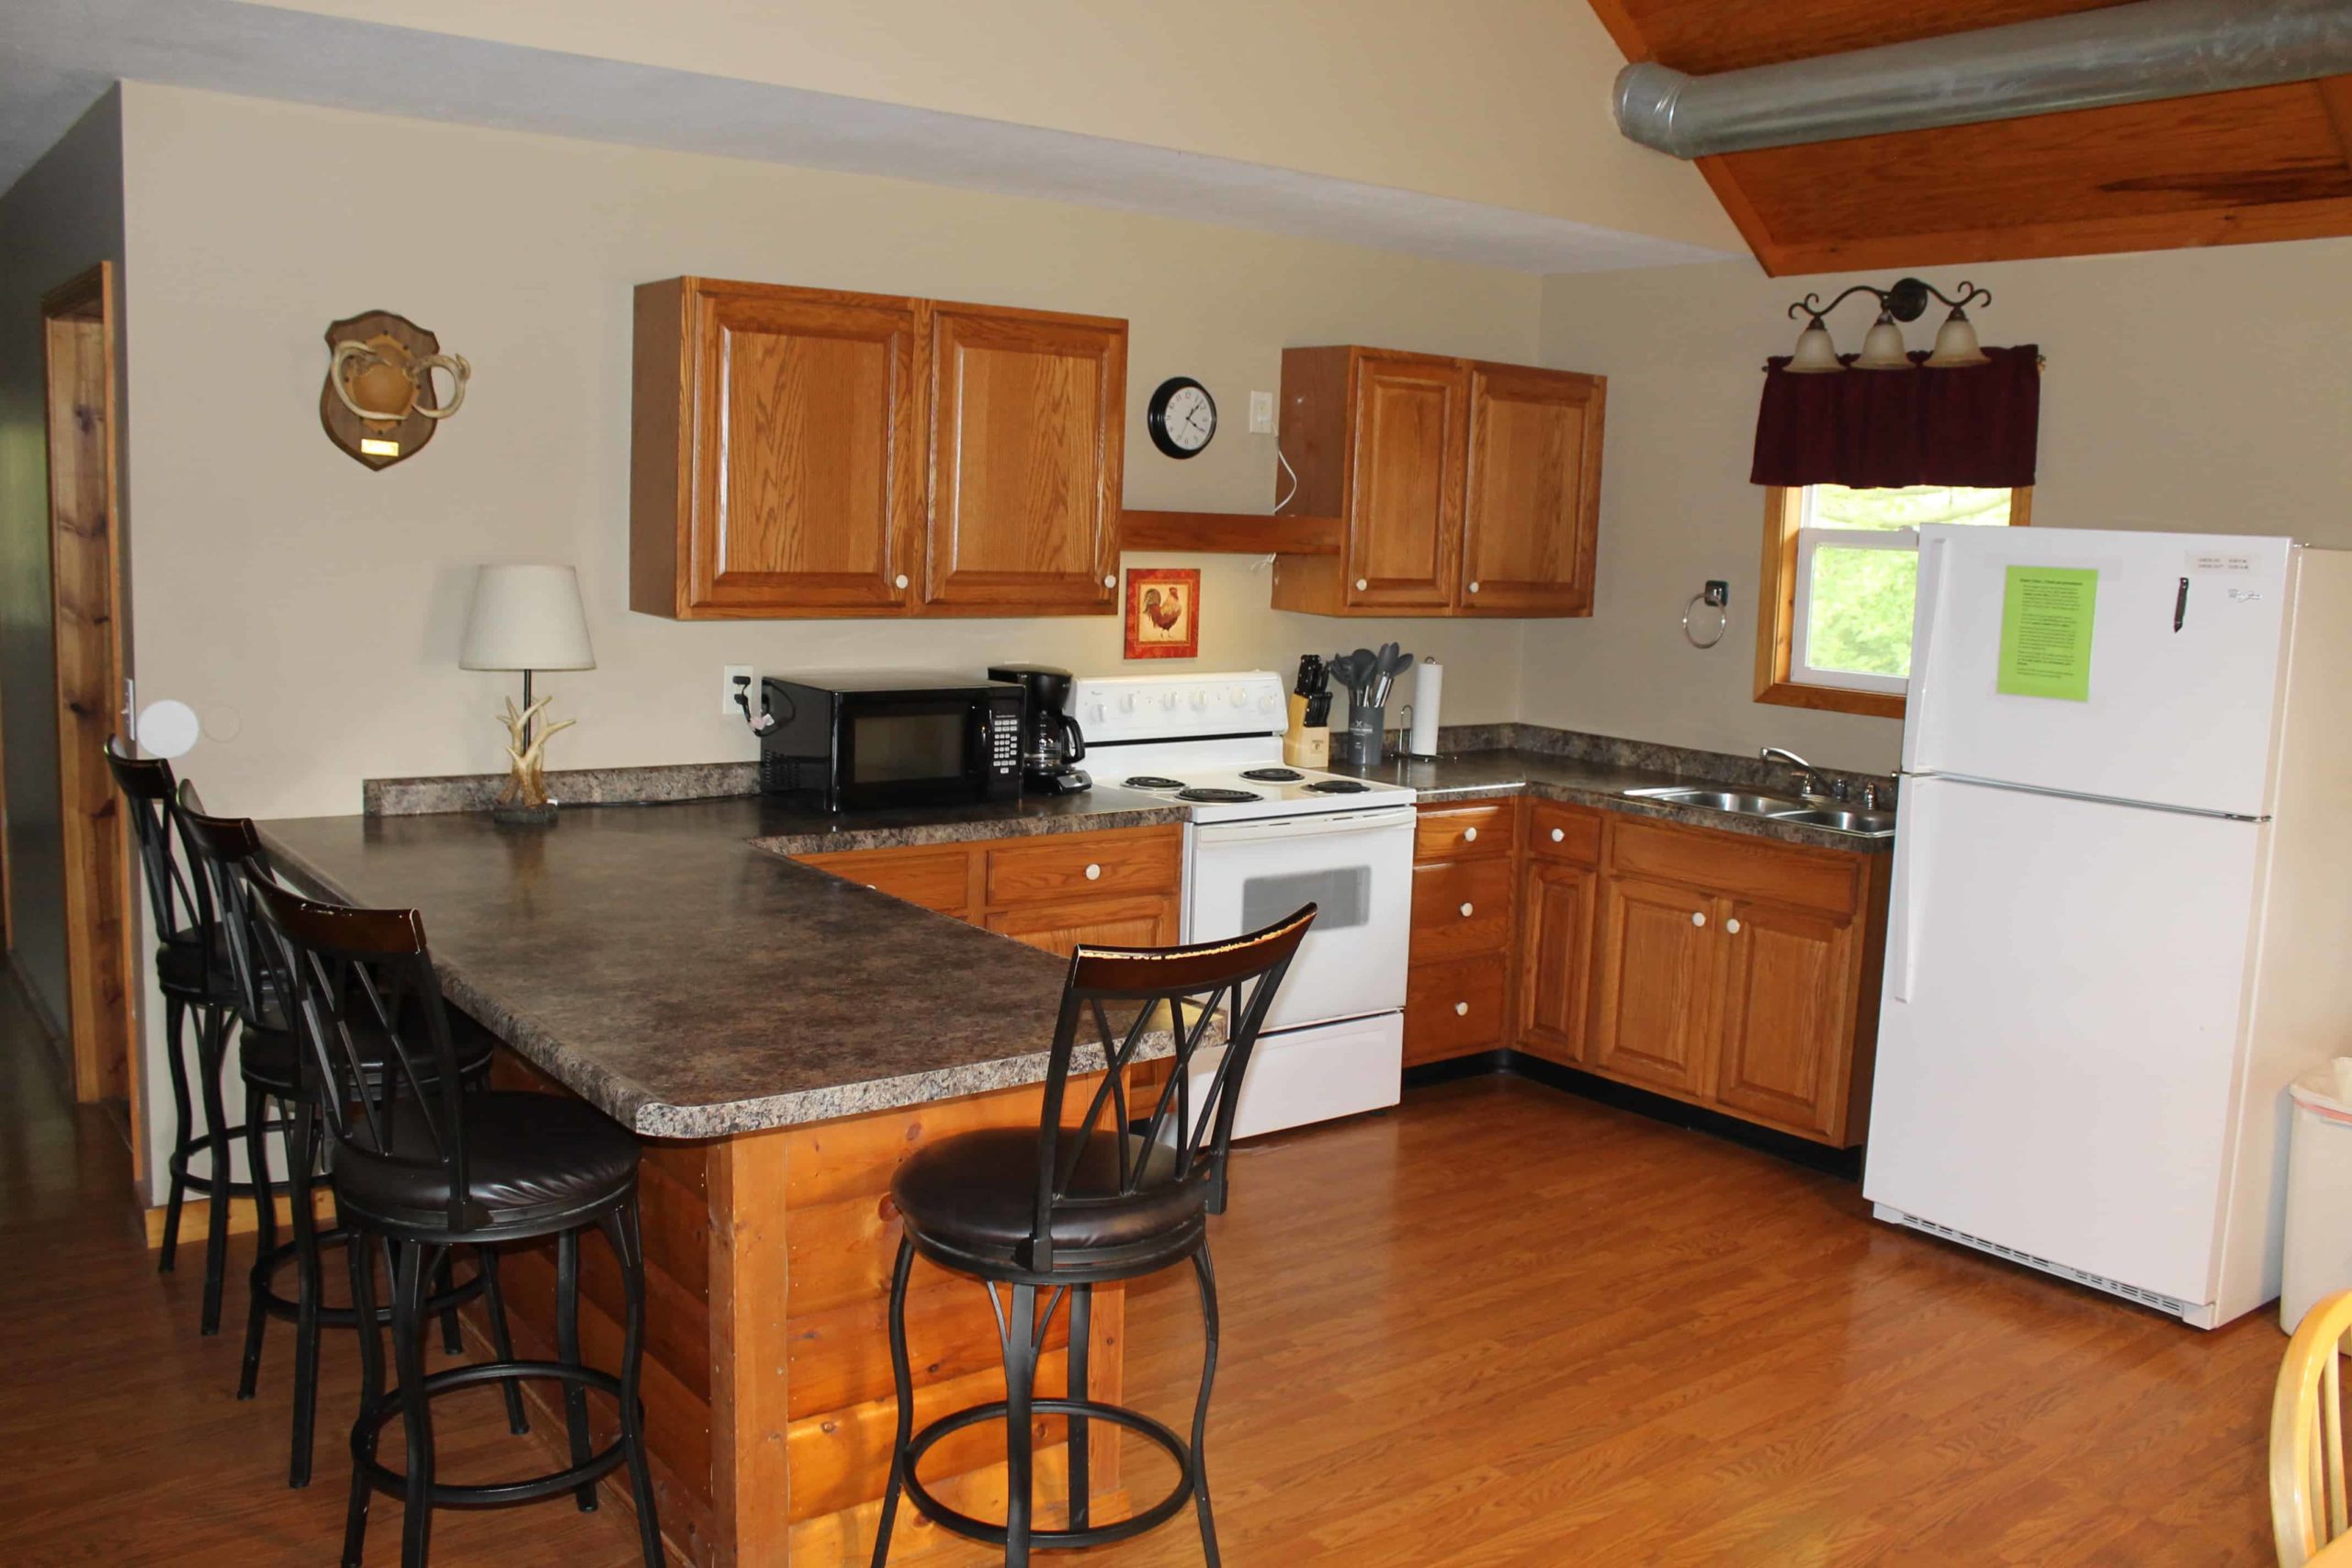 kitchen inside one of the vacation cabin rentals in shelbyville illinois